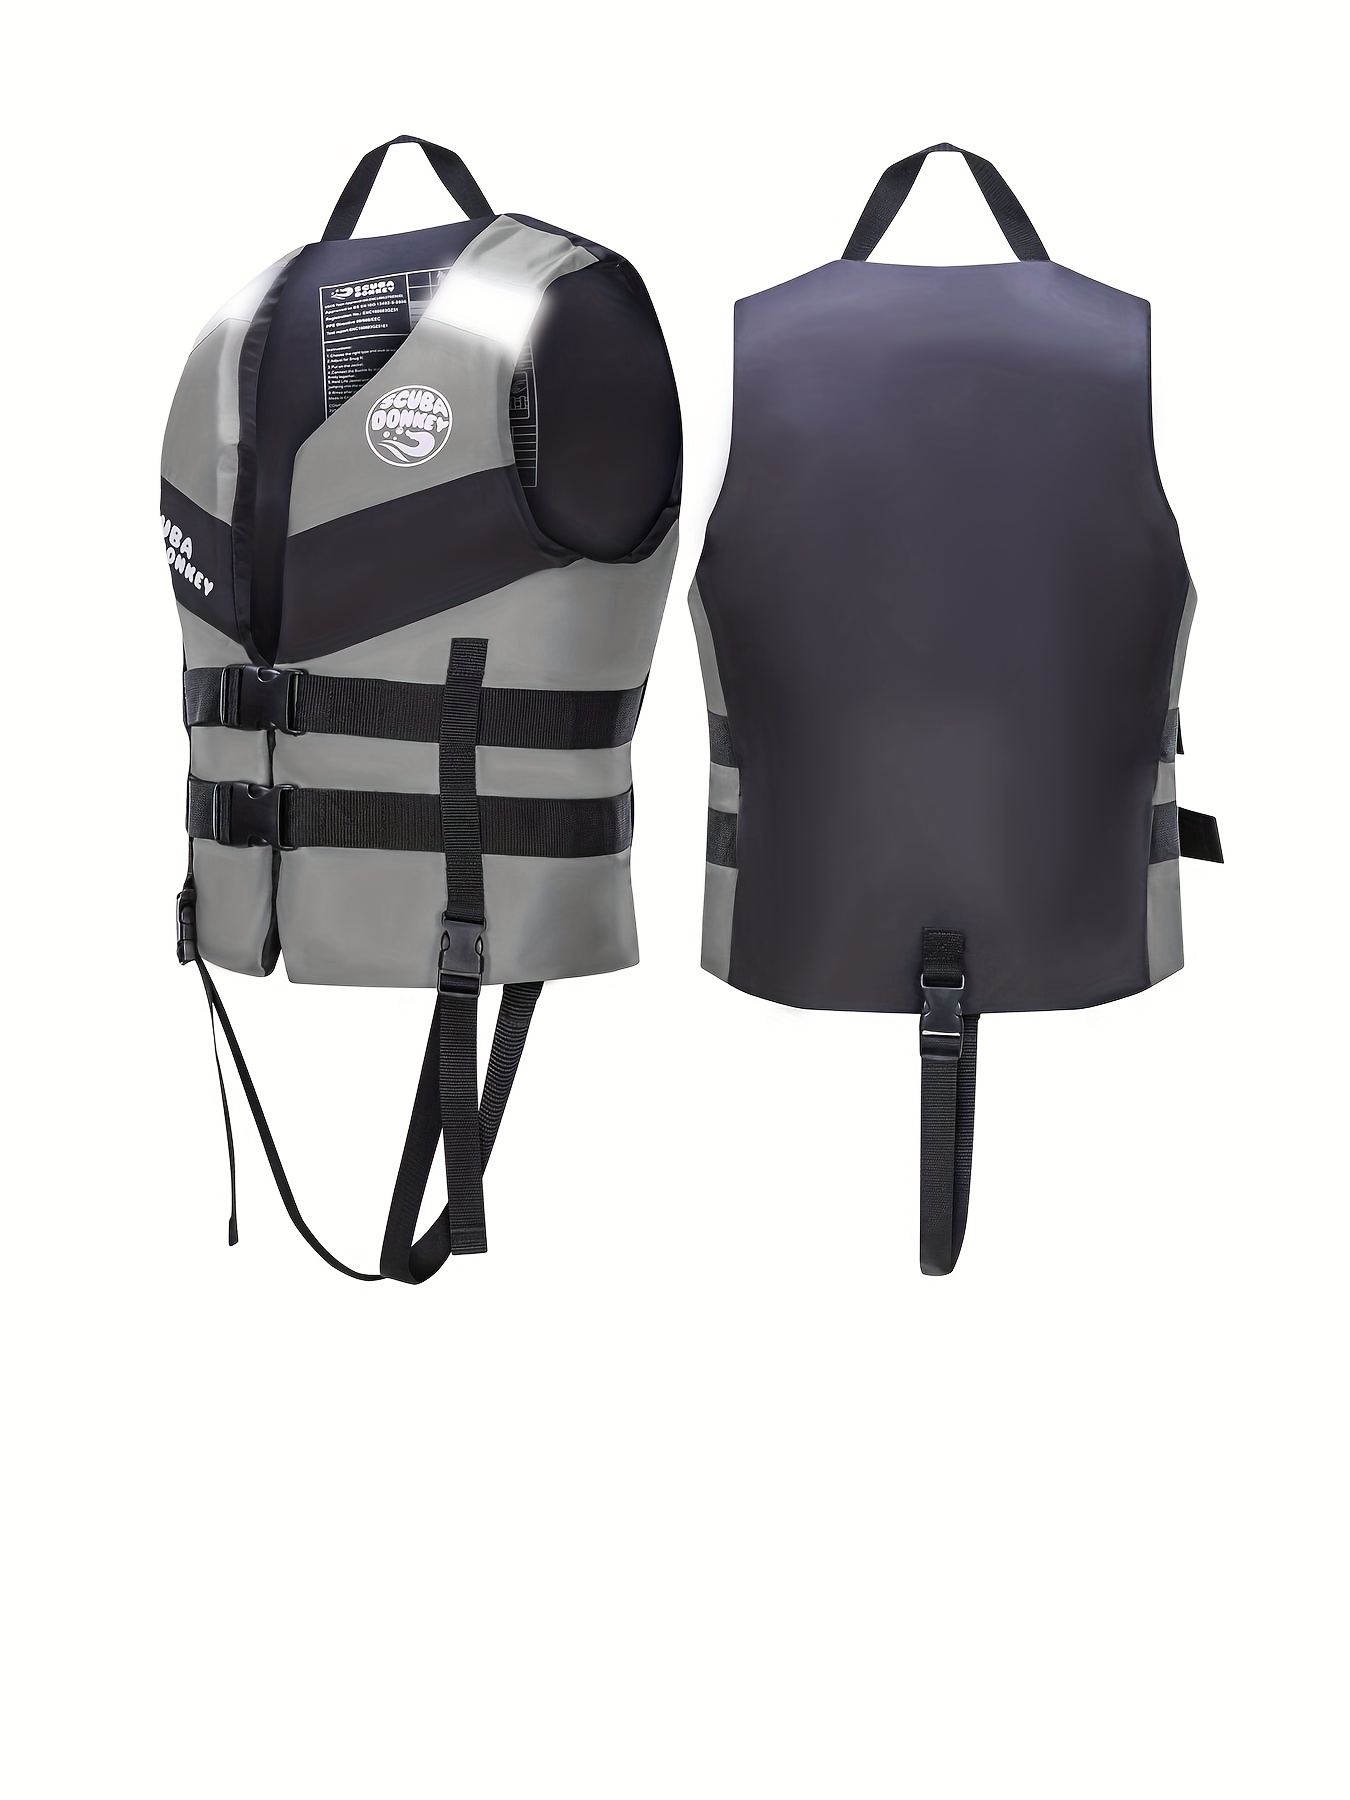 Life Jackets Vest Preserver Type Adult Fishing Boating With CO2